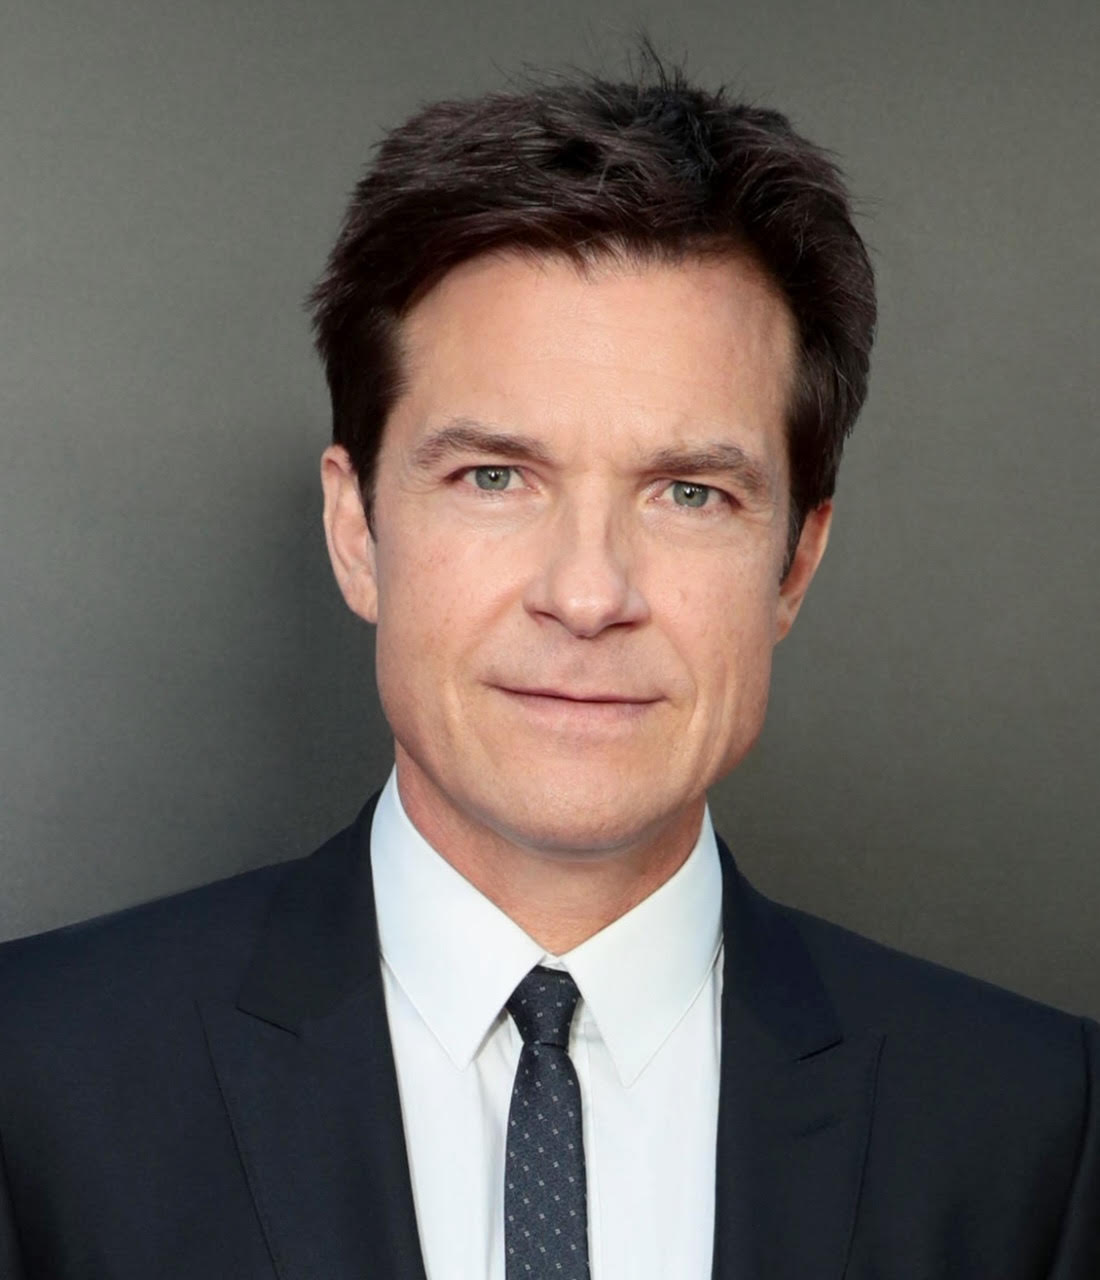 #Black Rabbit: Jason Bateman and Jude Law to Executive Produce and Star in Netflix Limited Series